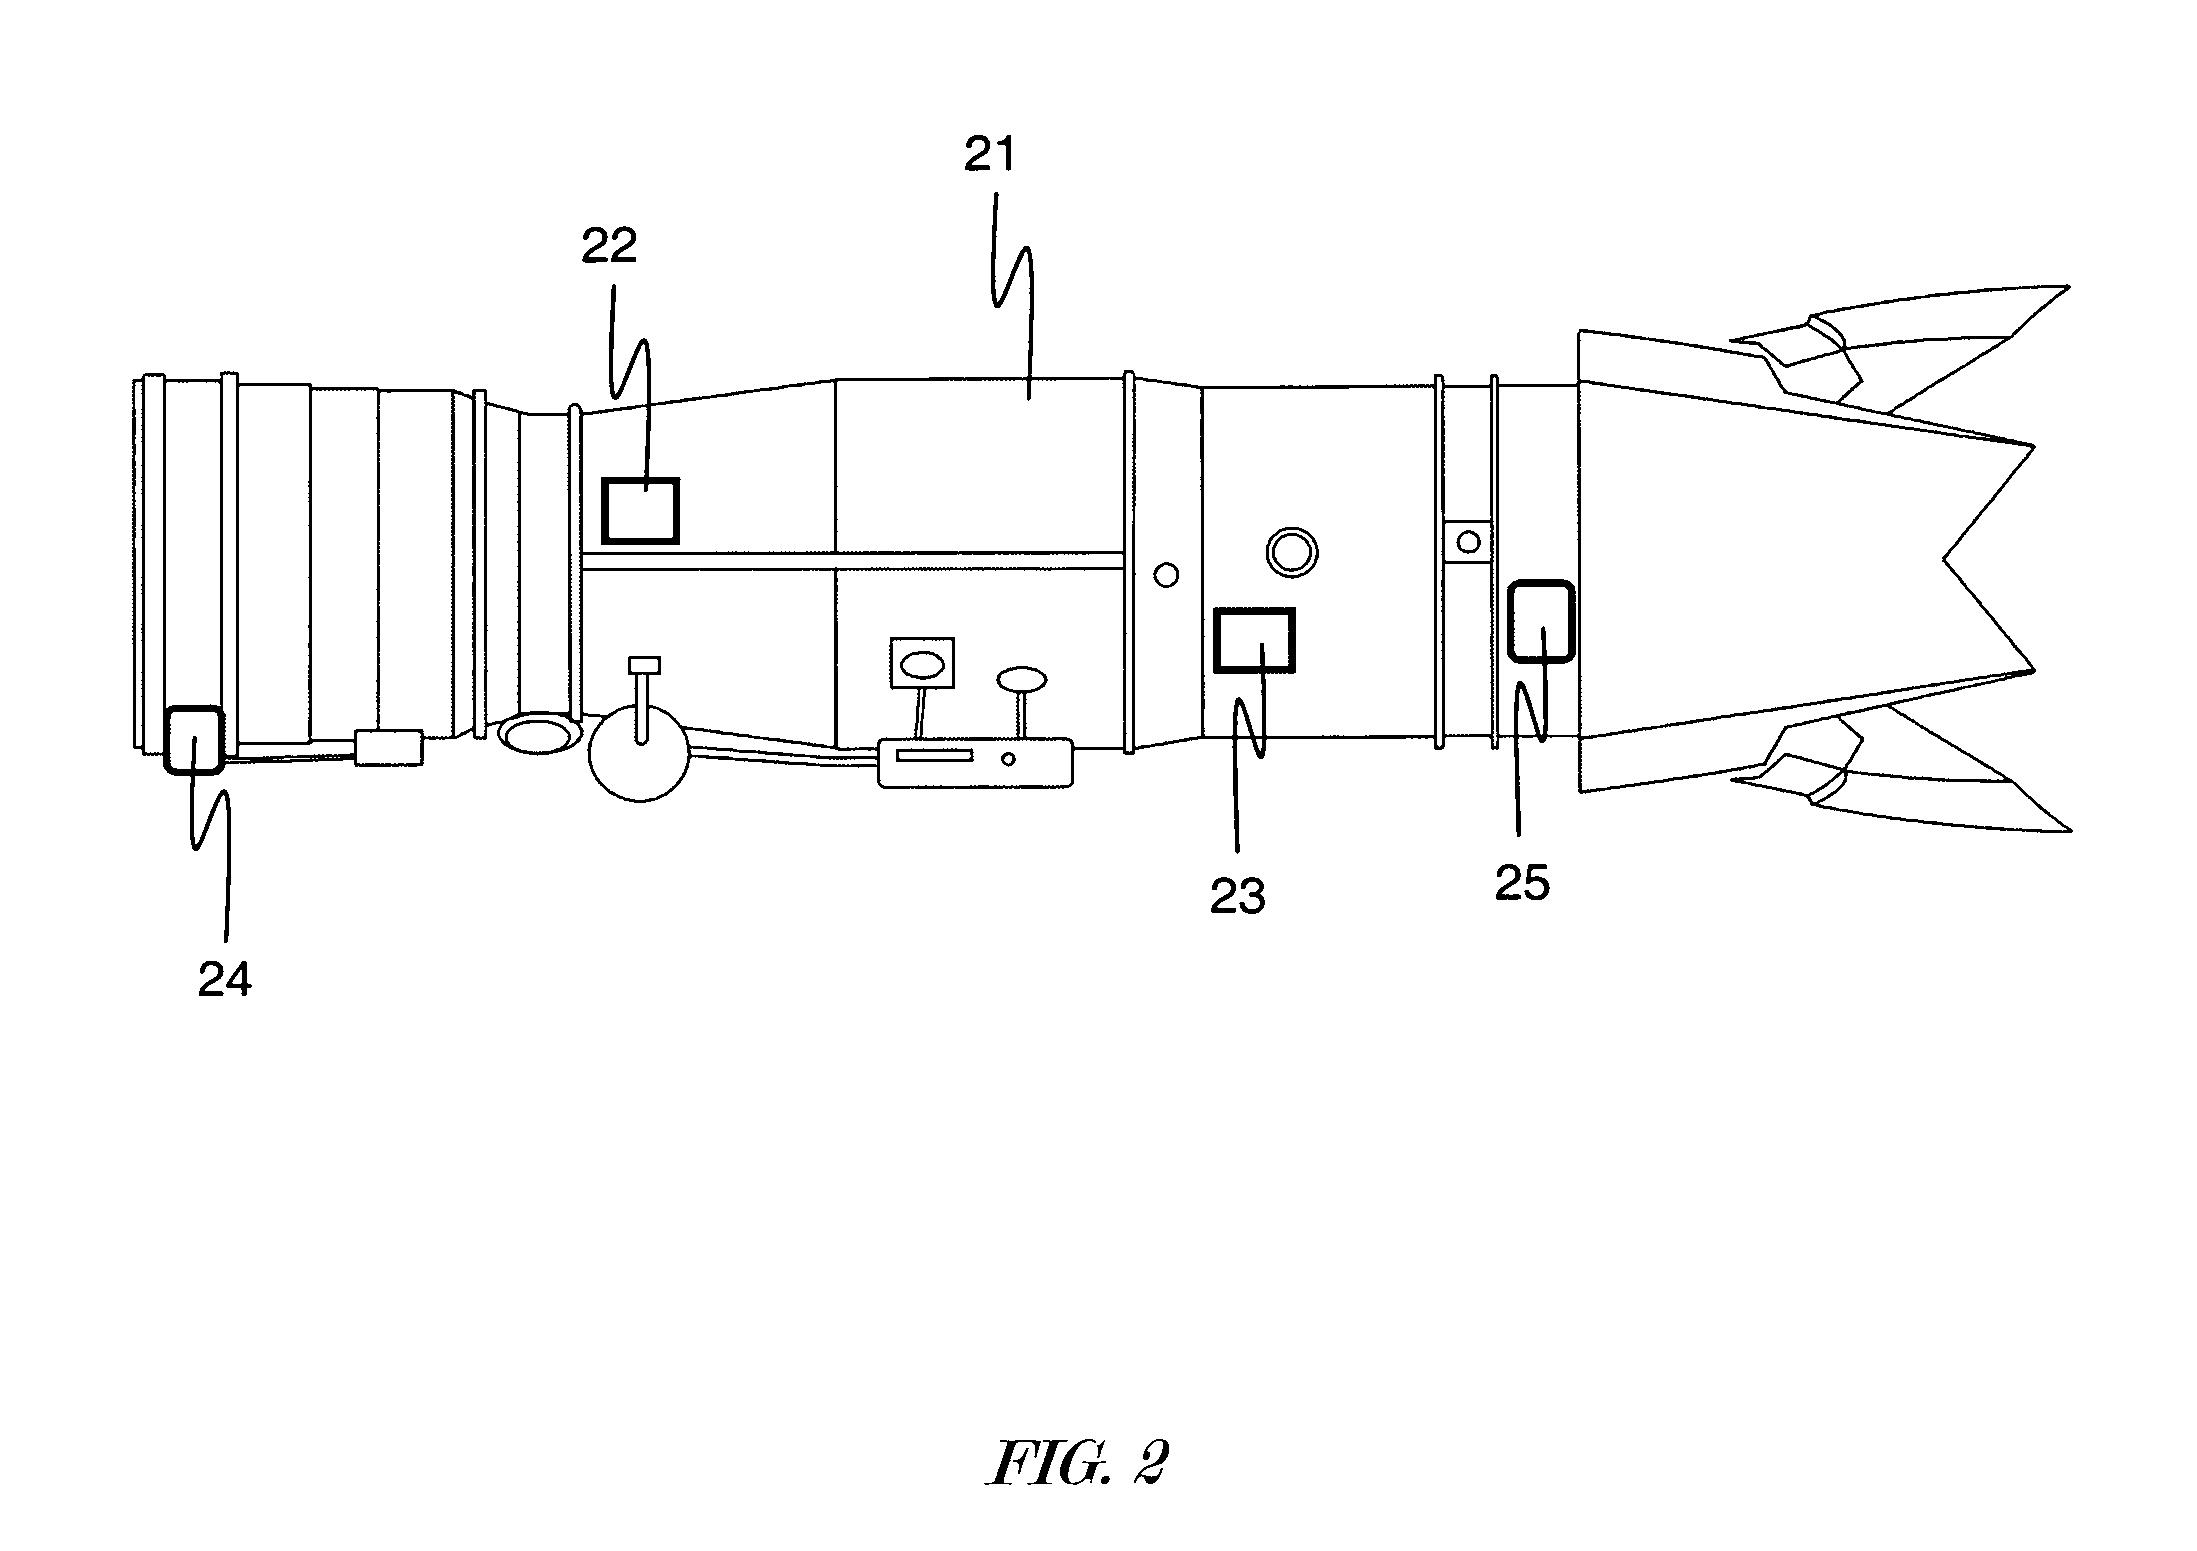 High-temperature sensor interface and network